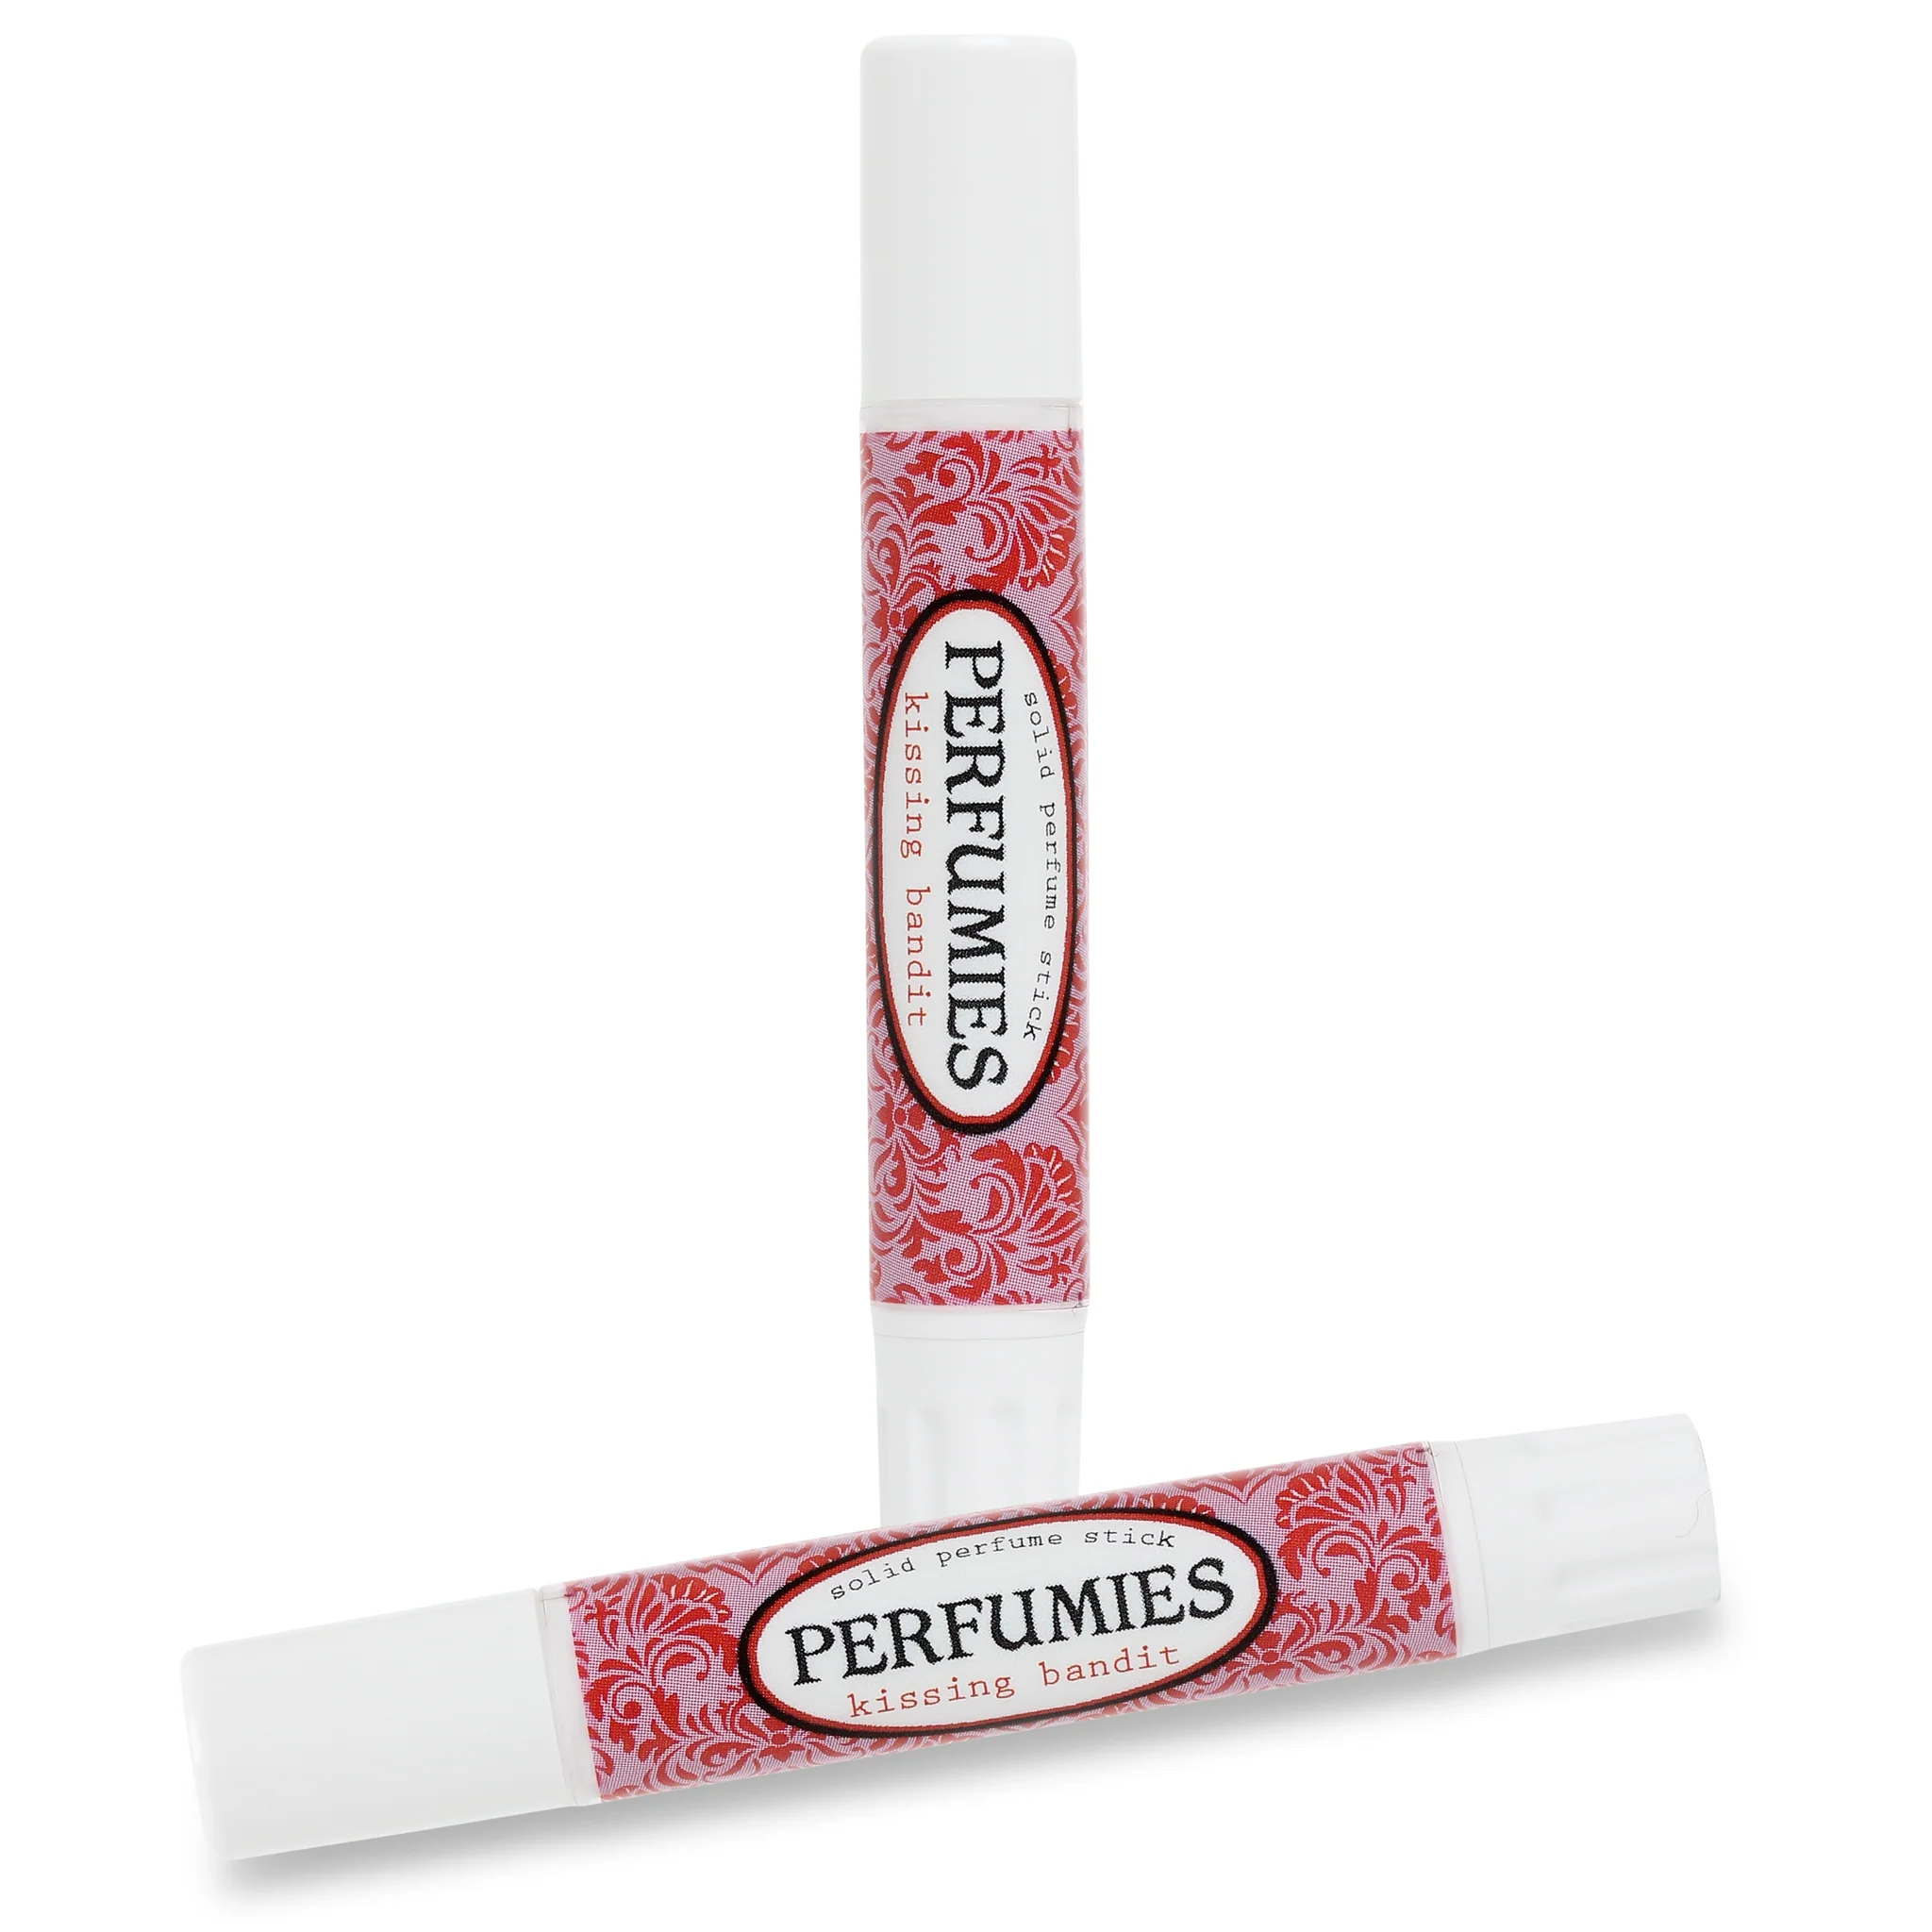 solid perfume stick by perfumies